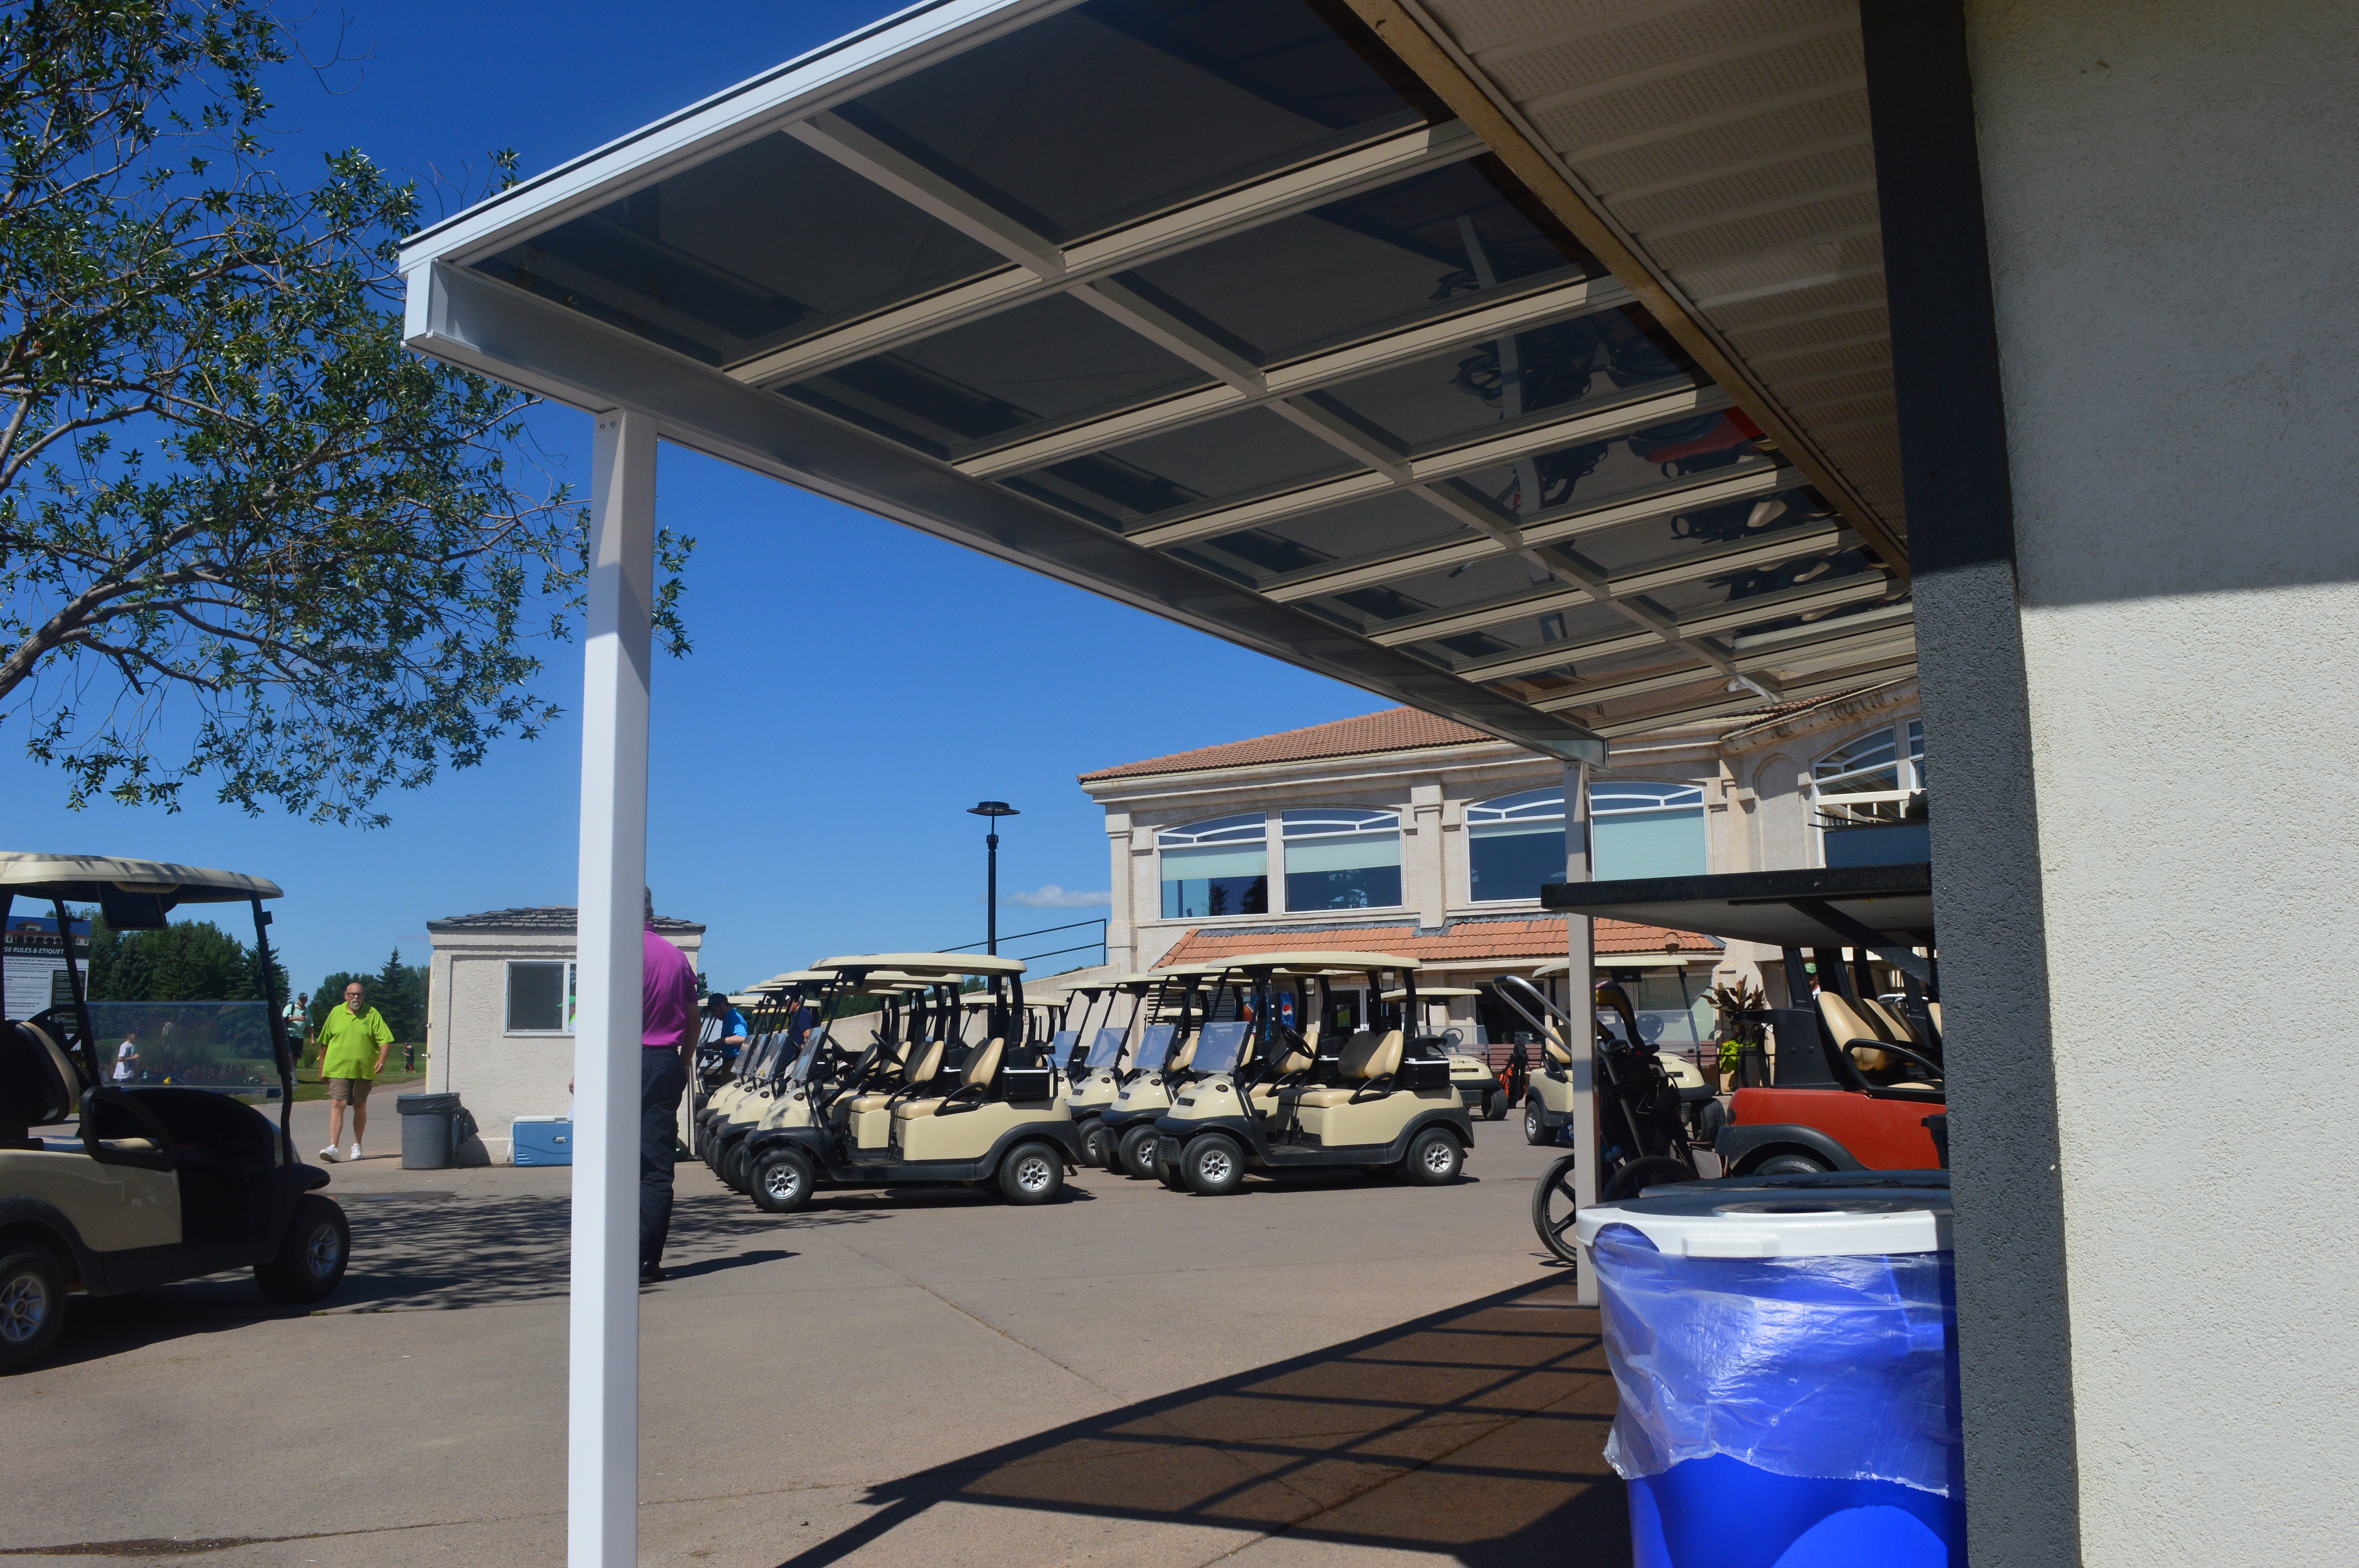 A small patio cover used to shade a lunch counter at a golf course